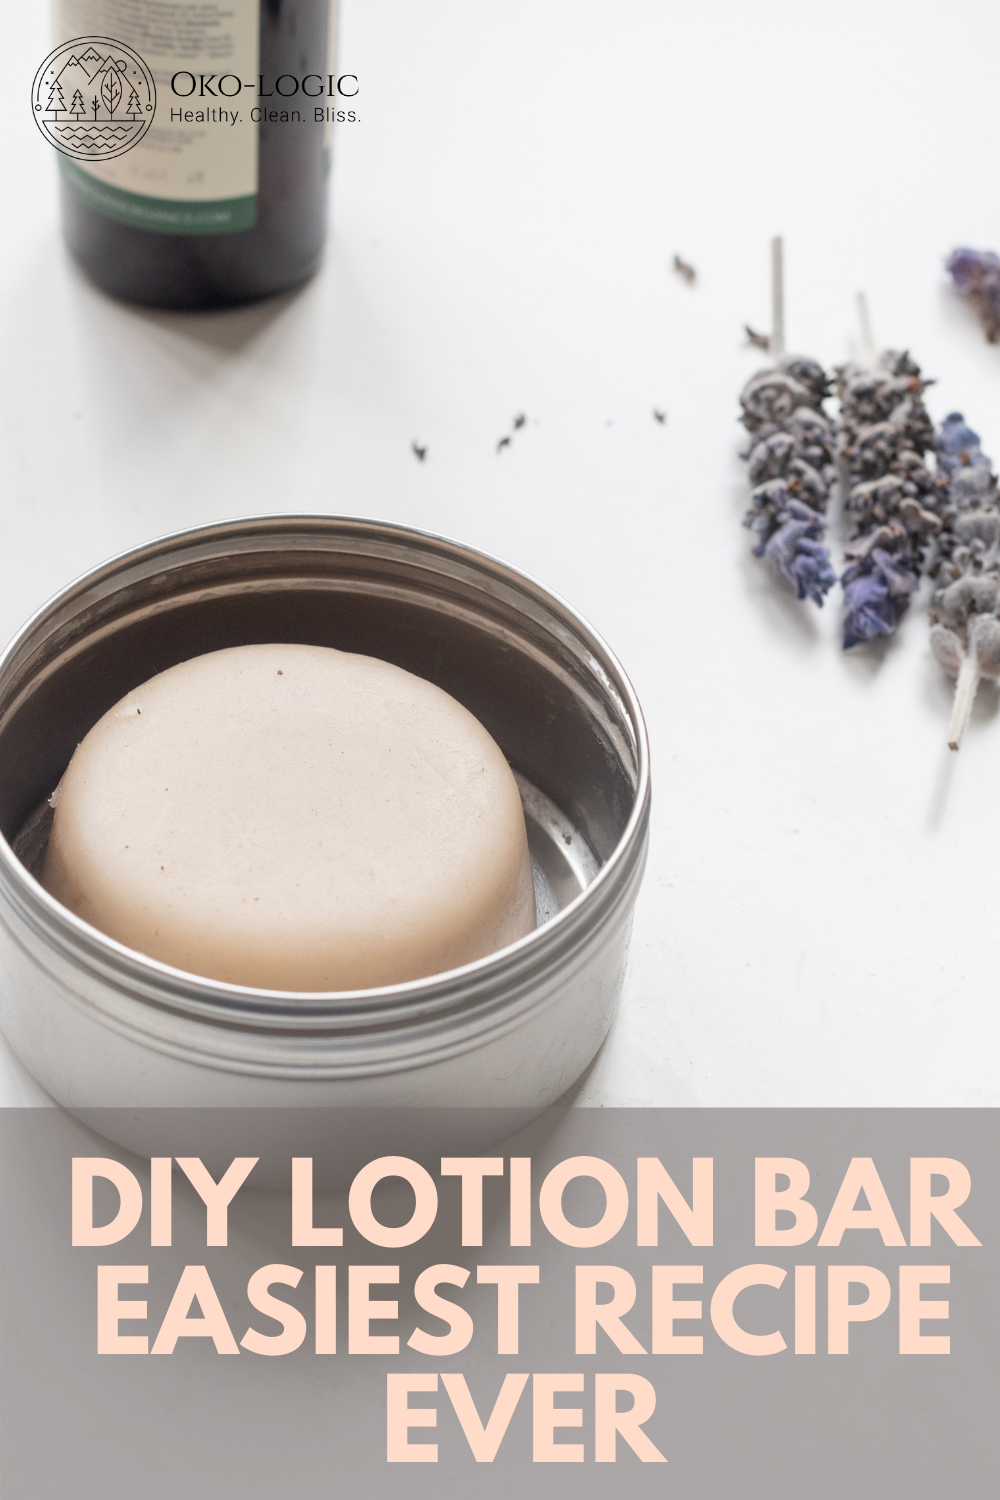 3 Ingredient Easy Non-Greasy Lotion Bar To Combat Dry Skin